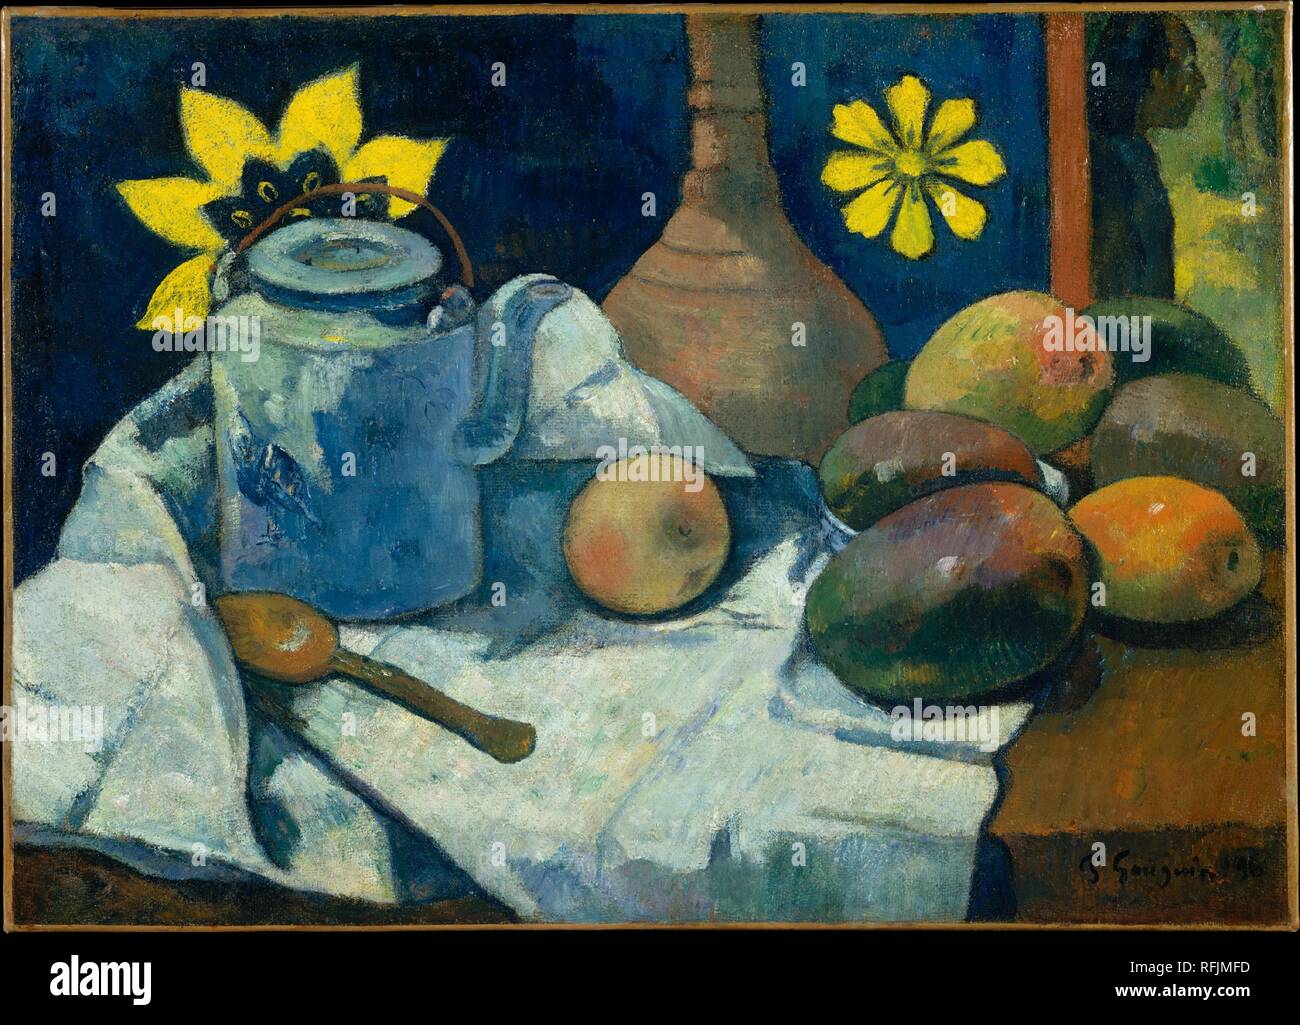 Still Life with Teapot and Fruit. Artist: Paul Gauguin (French, Paris 1848-1903 Atuona, Hiva Oa, Marquesas Islands). Dimensions: 18 3/4 x 26 in. (47.6 x 66 cm). Date: 1896.  One of Gauguin's most treasured possessions was a painting by Cézanne, <i>Still Life with Fruit Dish</i> (1879-80, now Museum of Modern Art, New York ), which he emulates in this picture. Within a similarly compressed space, Gauguin substituted mangoes for Cézanne's apples and a Tahitian-style printed cloth for a French floral wallpaper design. One significant departure is the human figure at the upper right, glimpsed thro Stock Photo